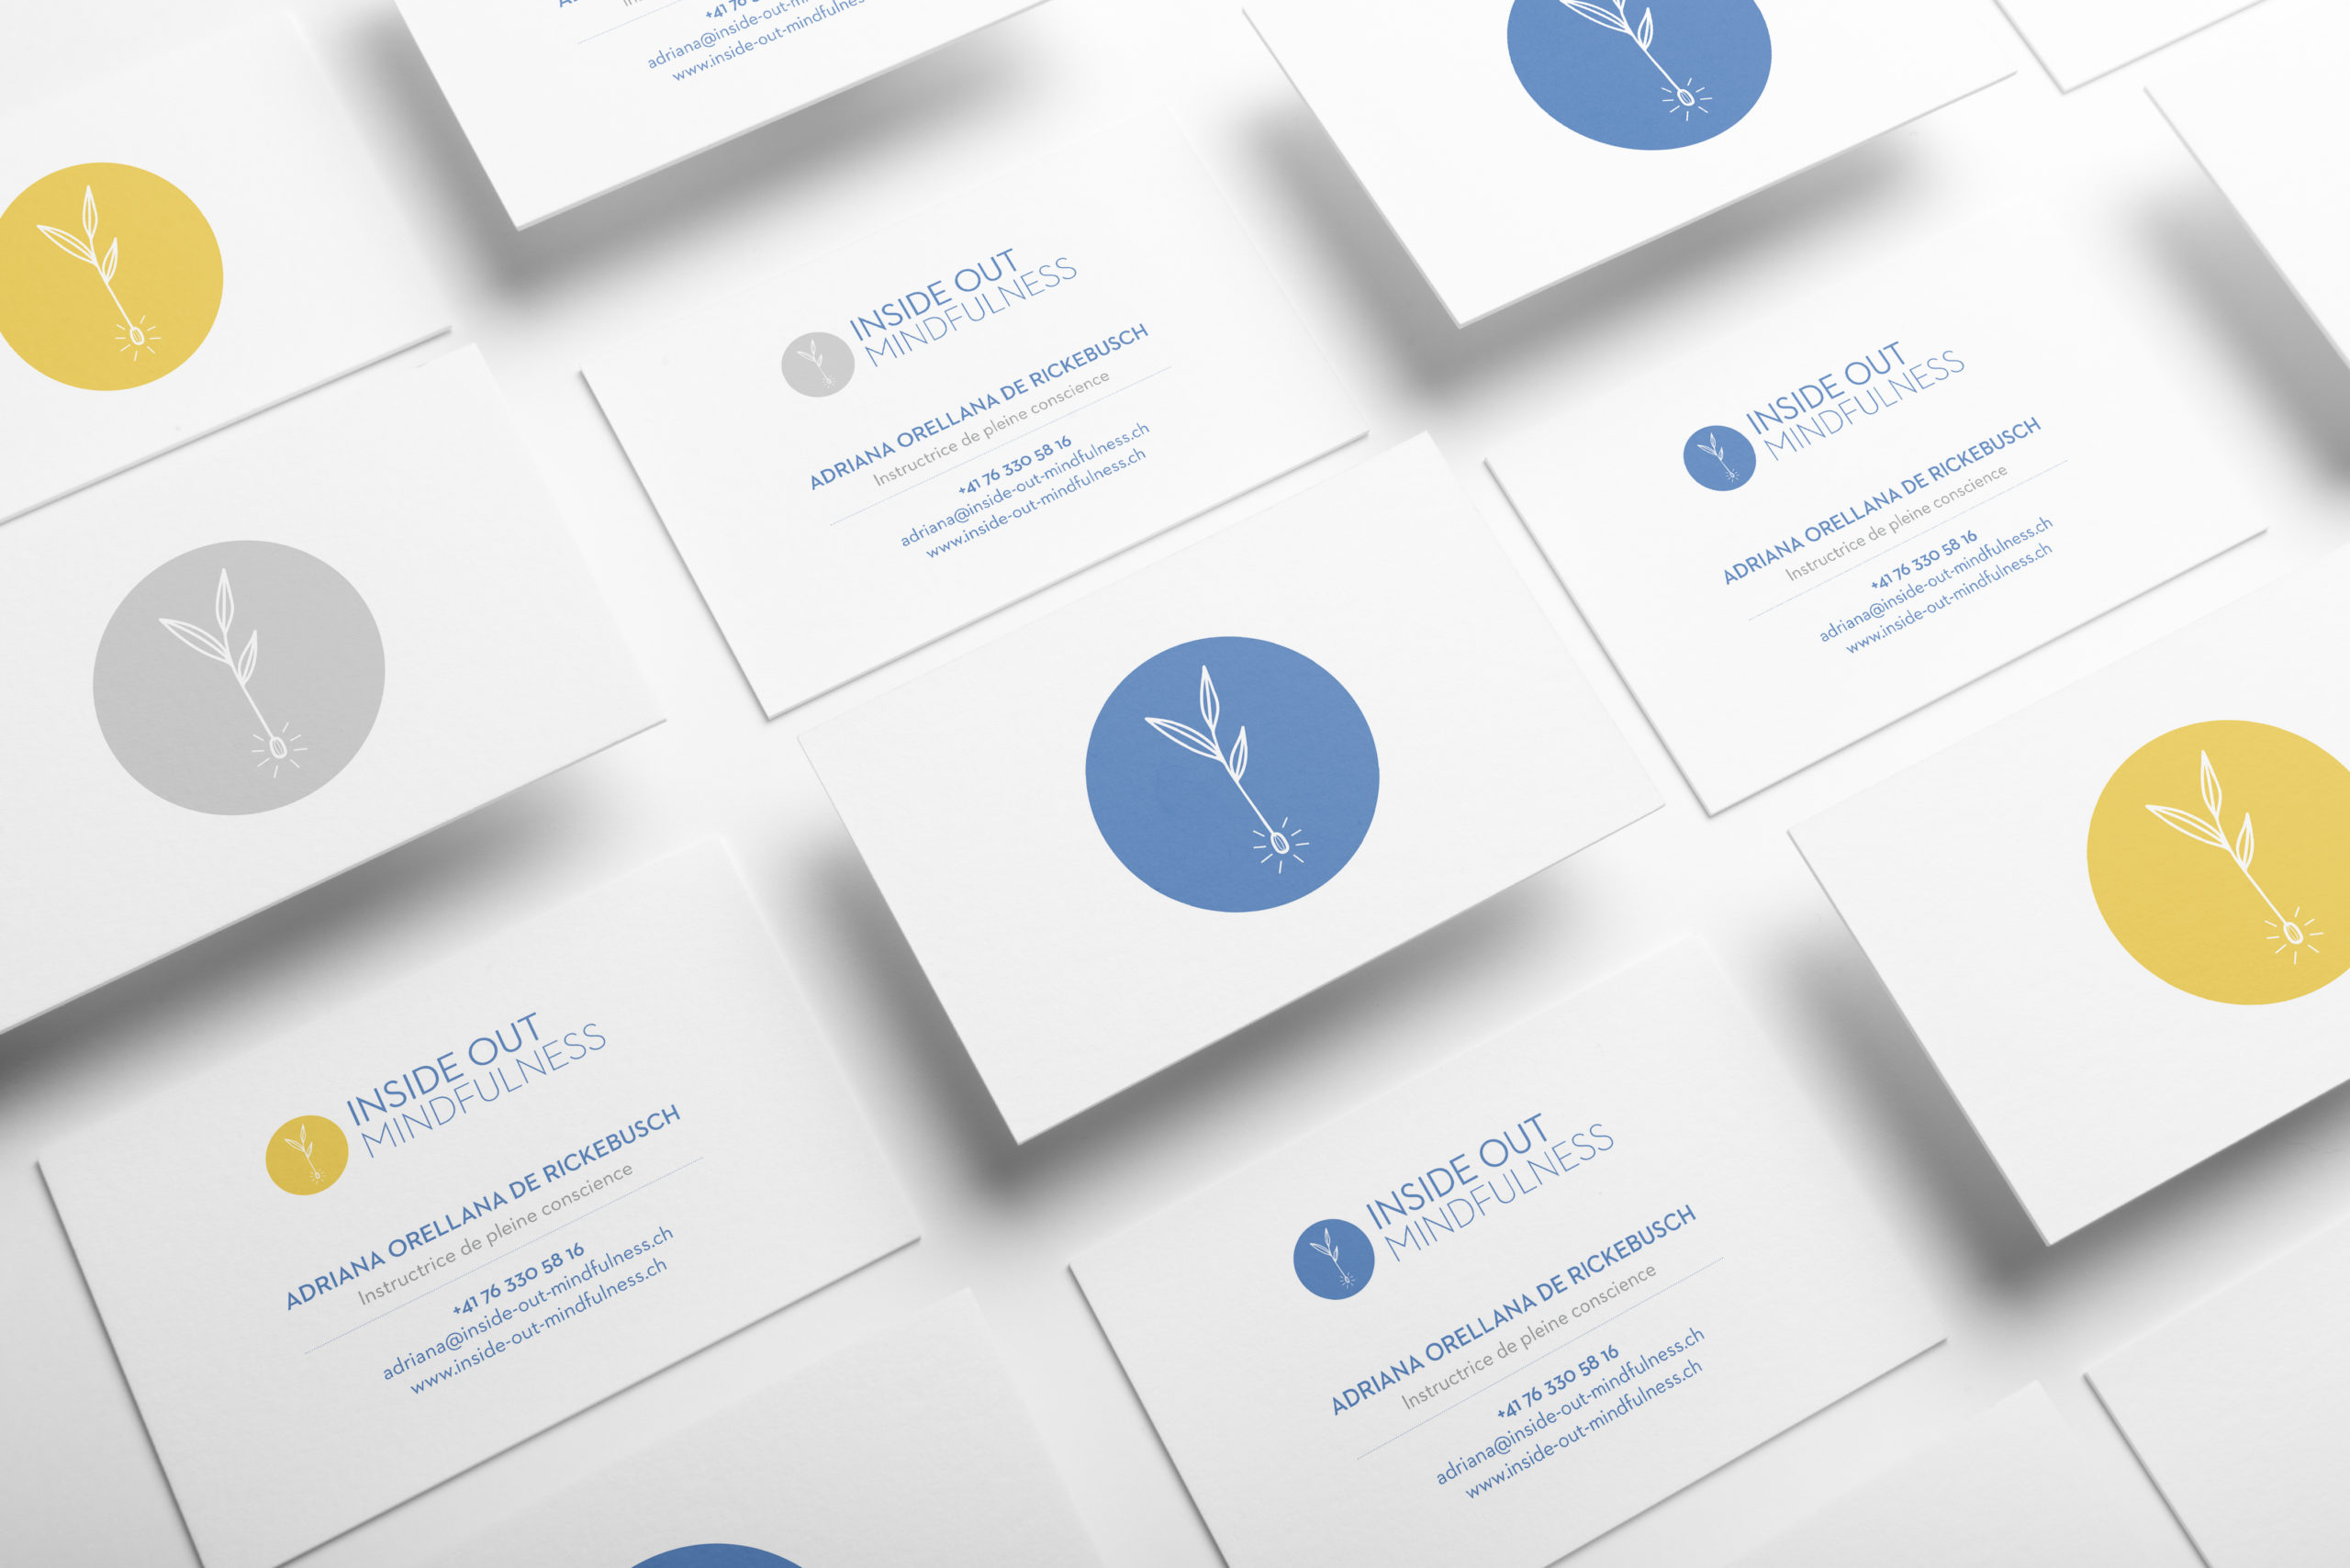 Business-cards-InsideOutMindfulness-scaled-3